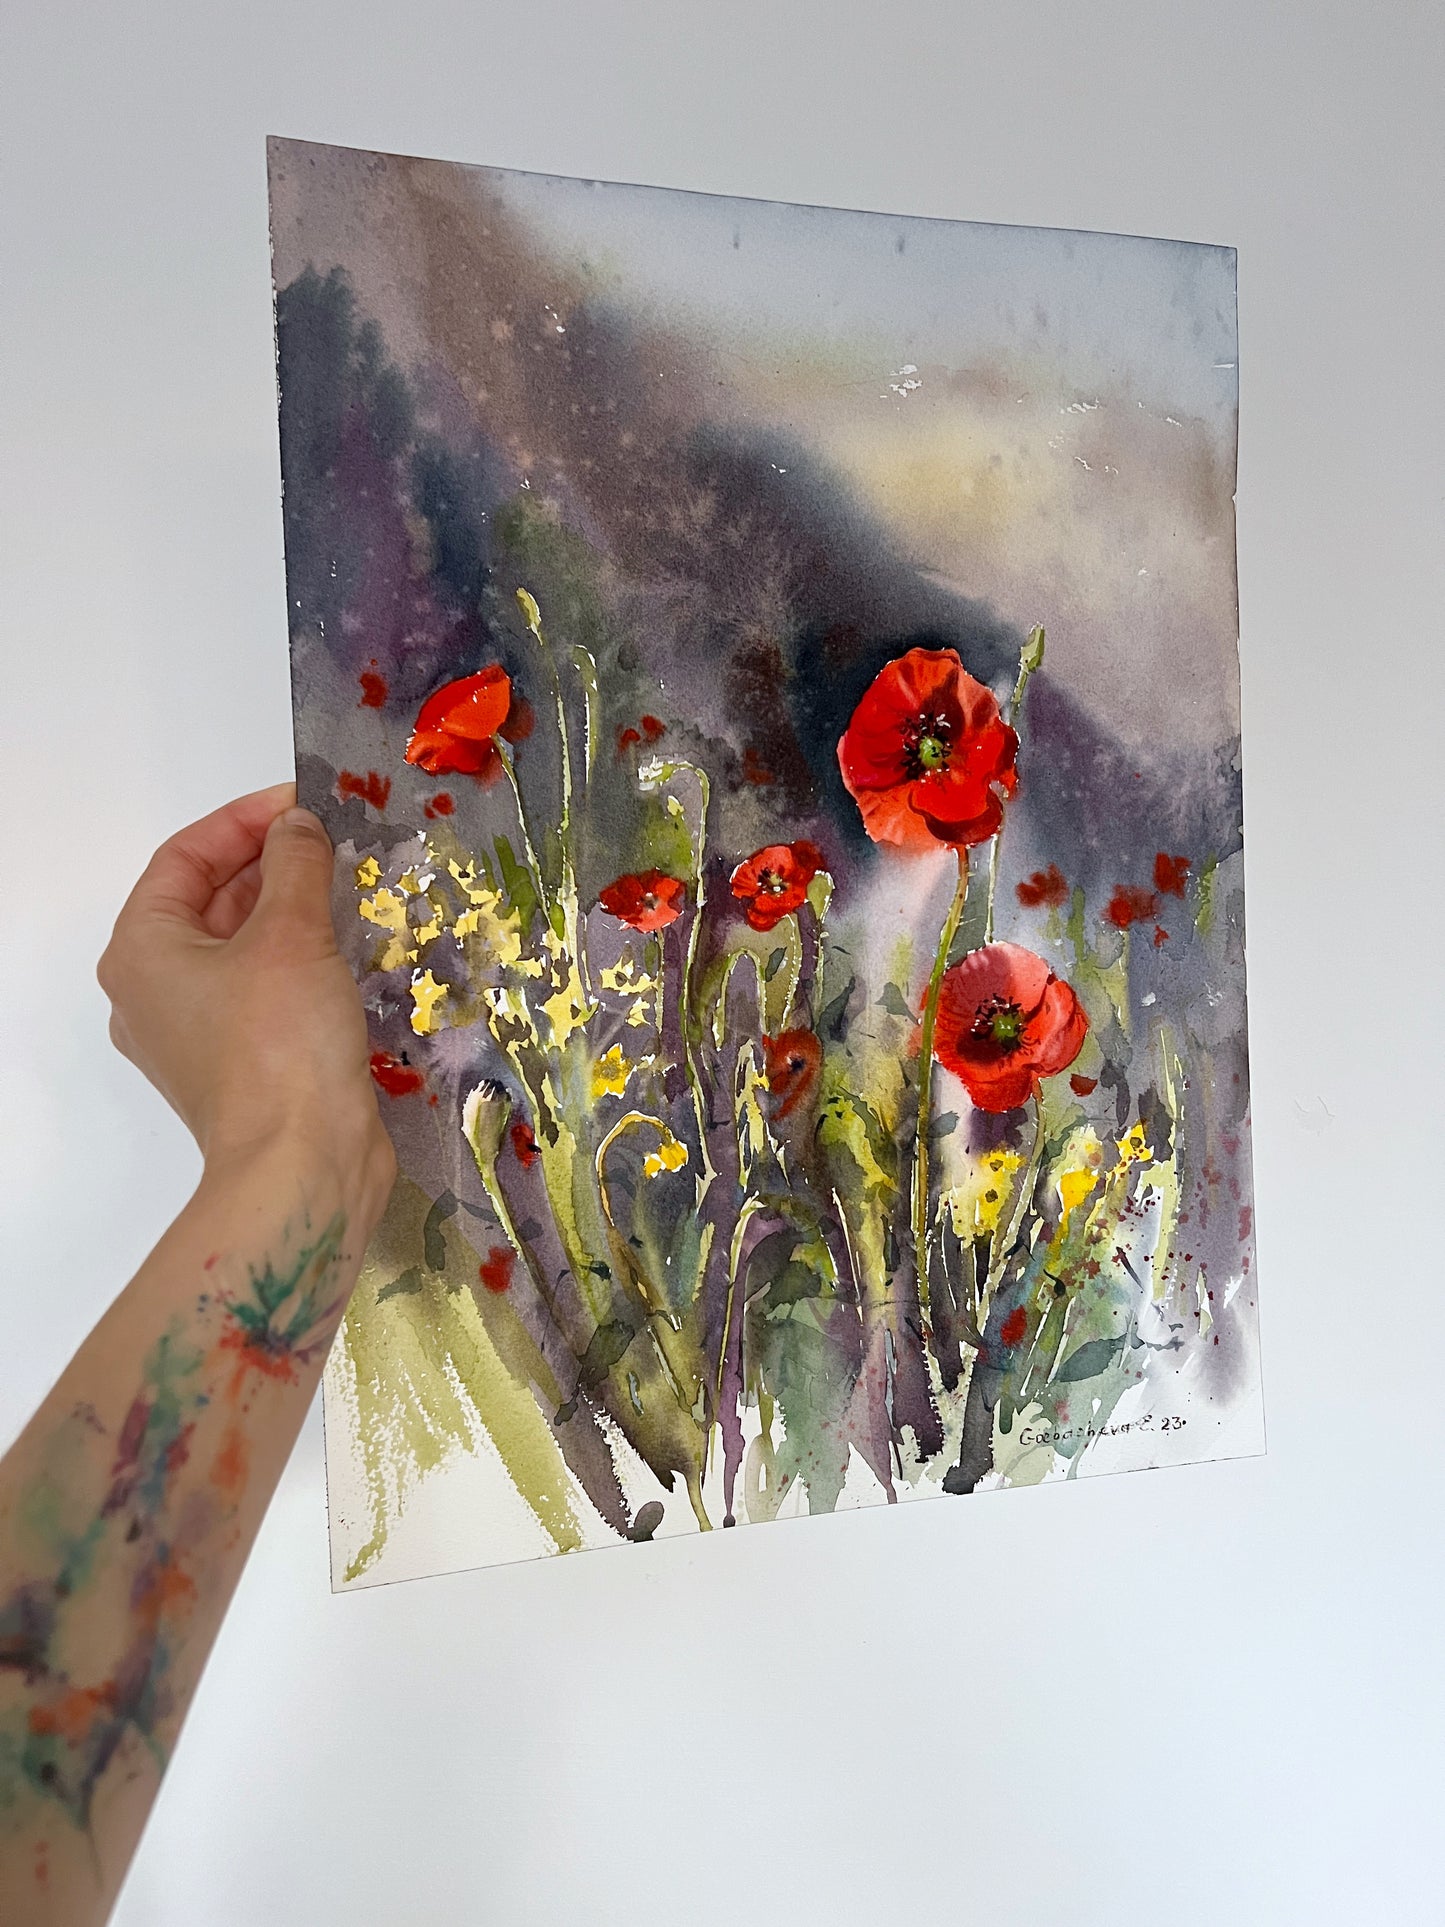 Watercolor Poppies Painting Original, Red Flowers Art, Poppy Field, Landscape Artwork, Kitchen Wall Decor, Gift